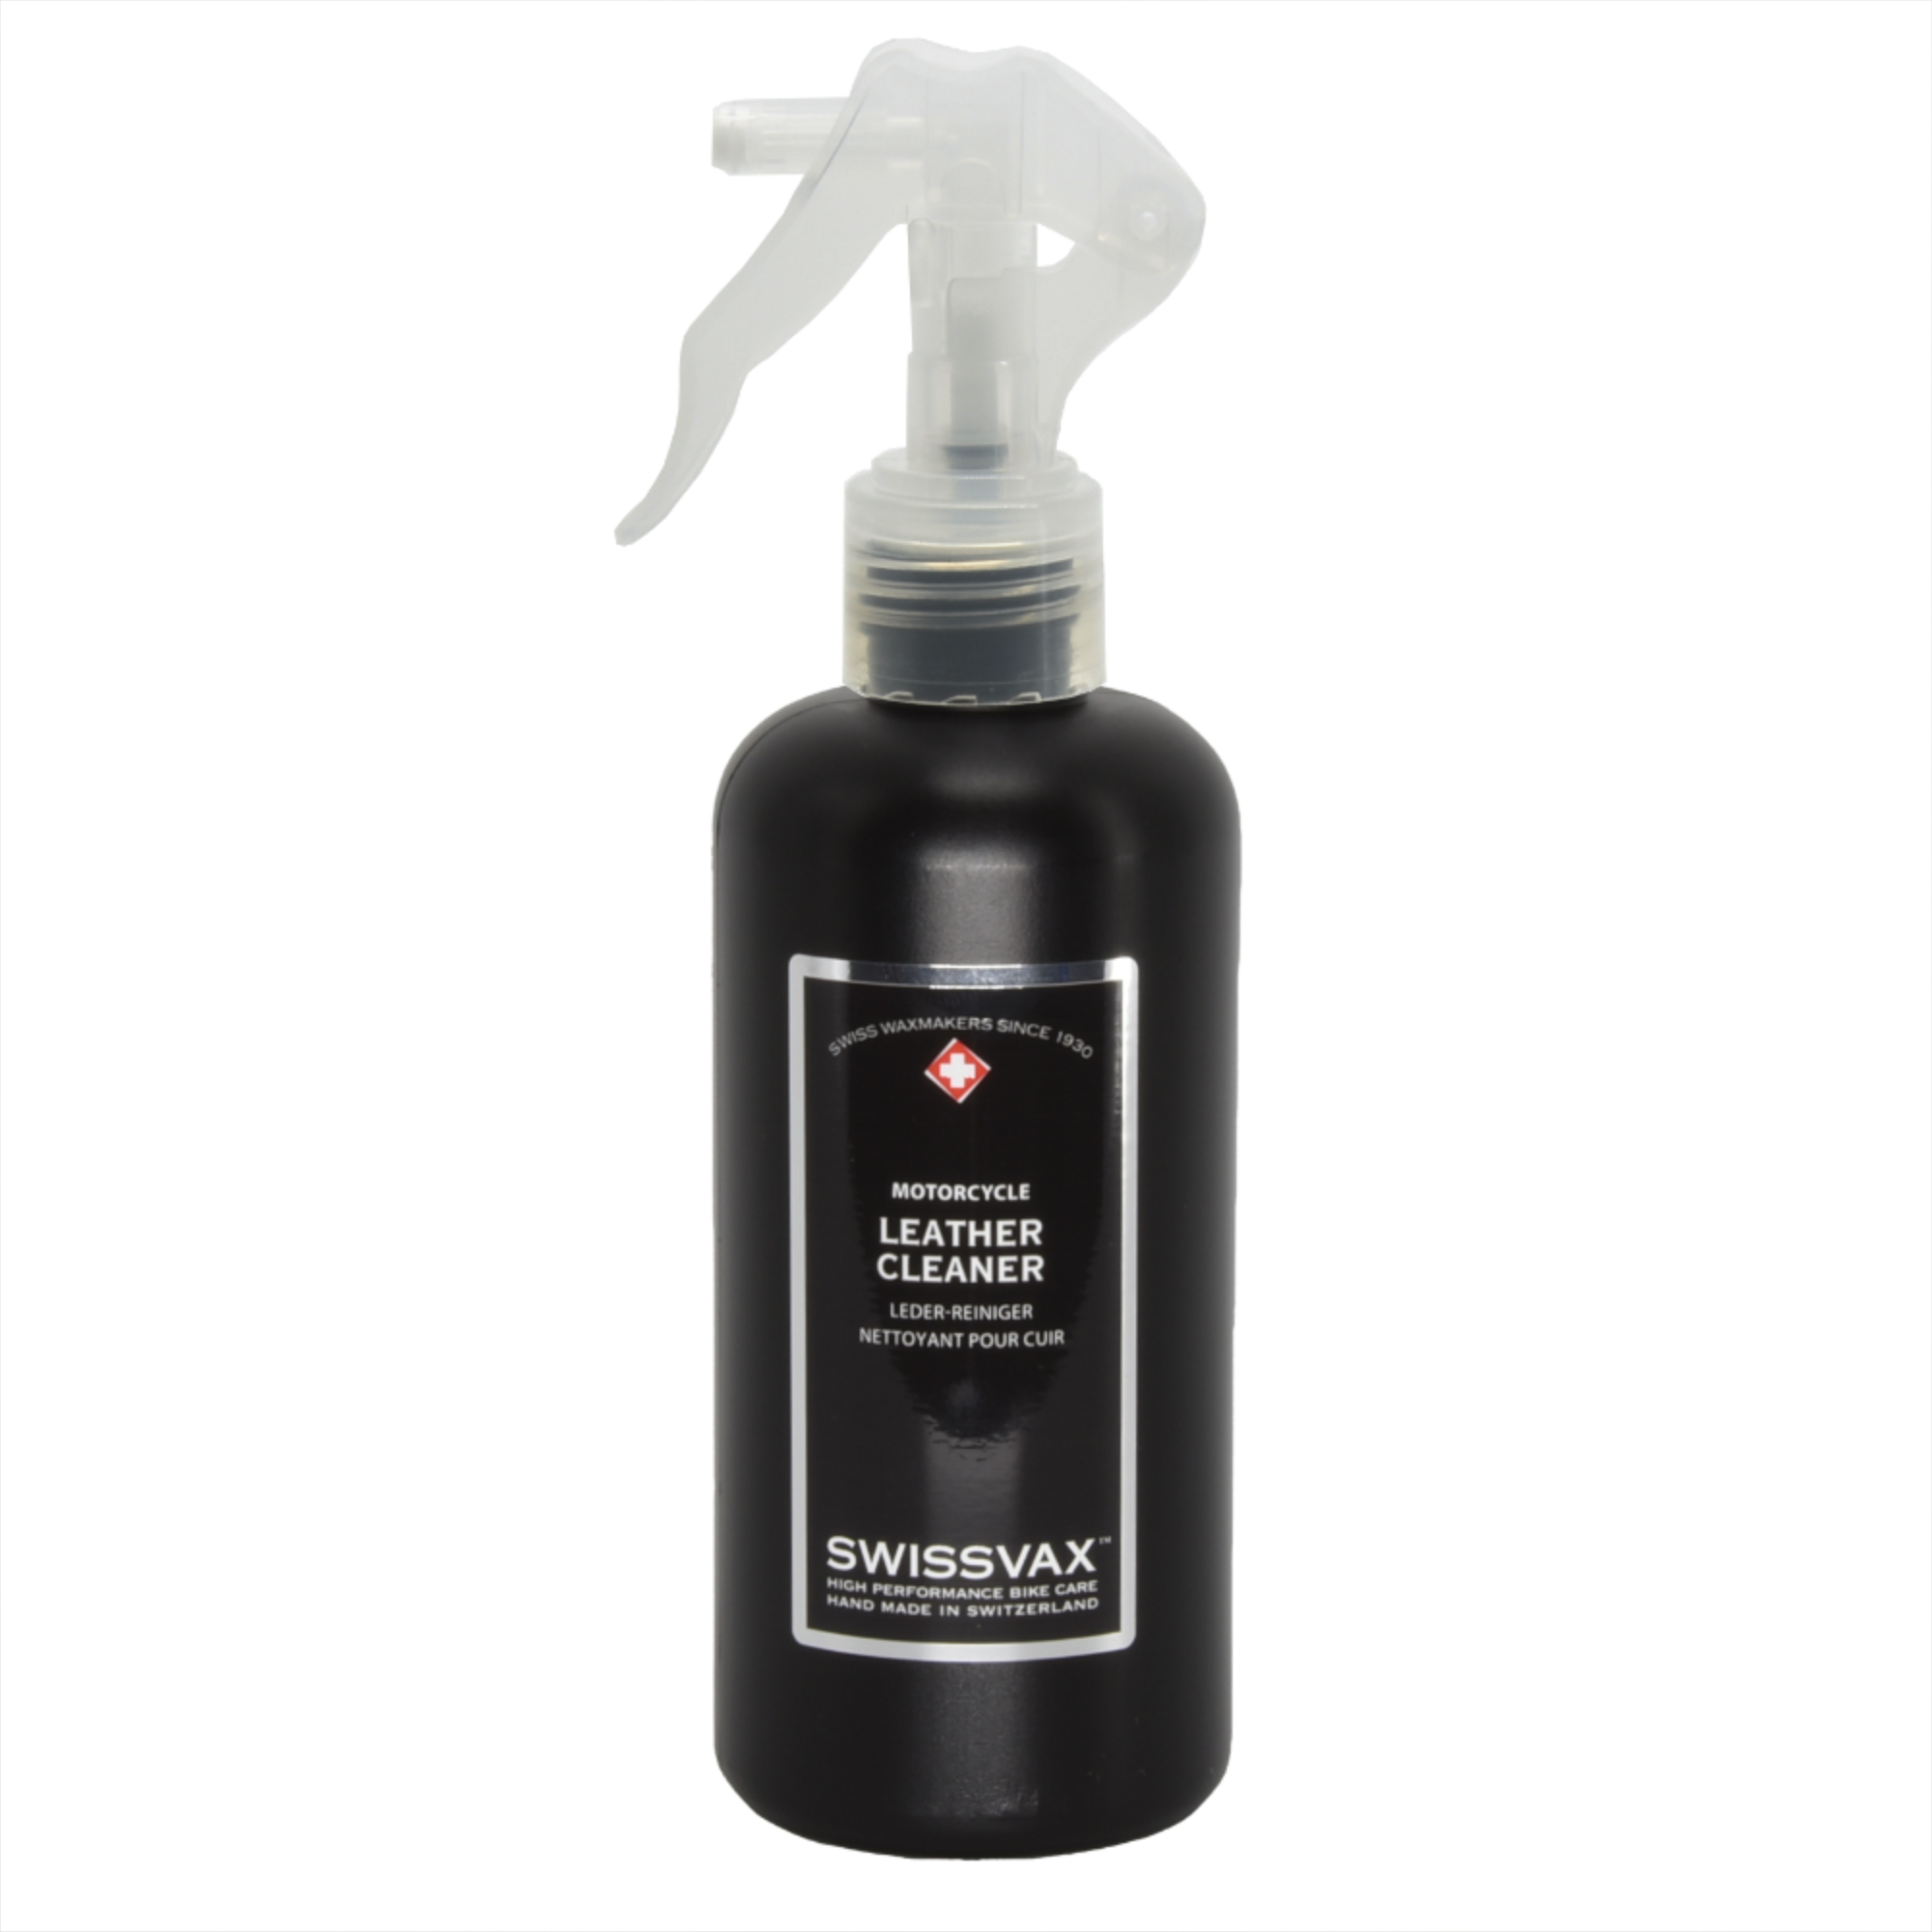 Swissvax Motorcycle LEATHER CLEANER